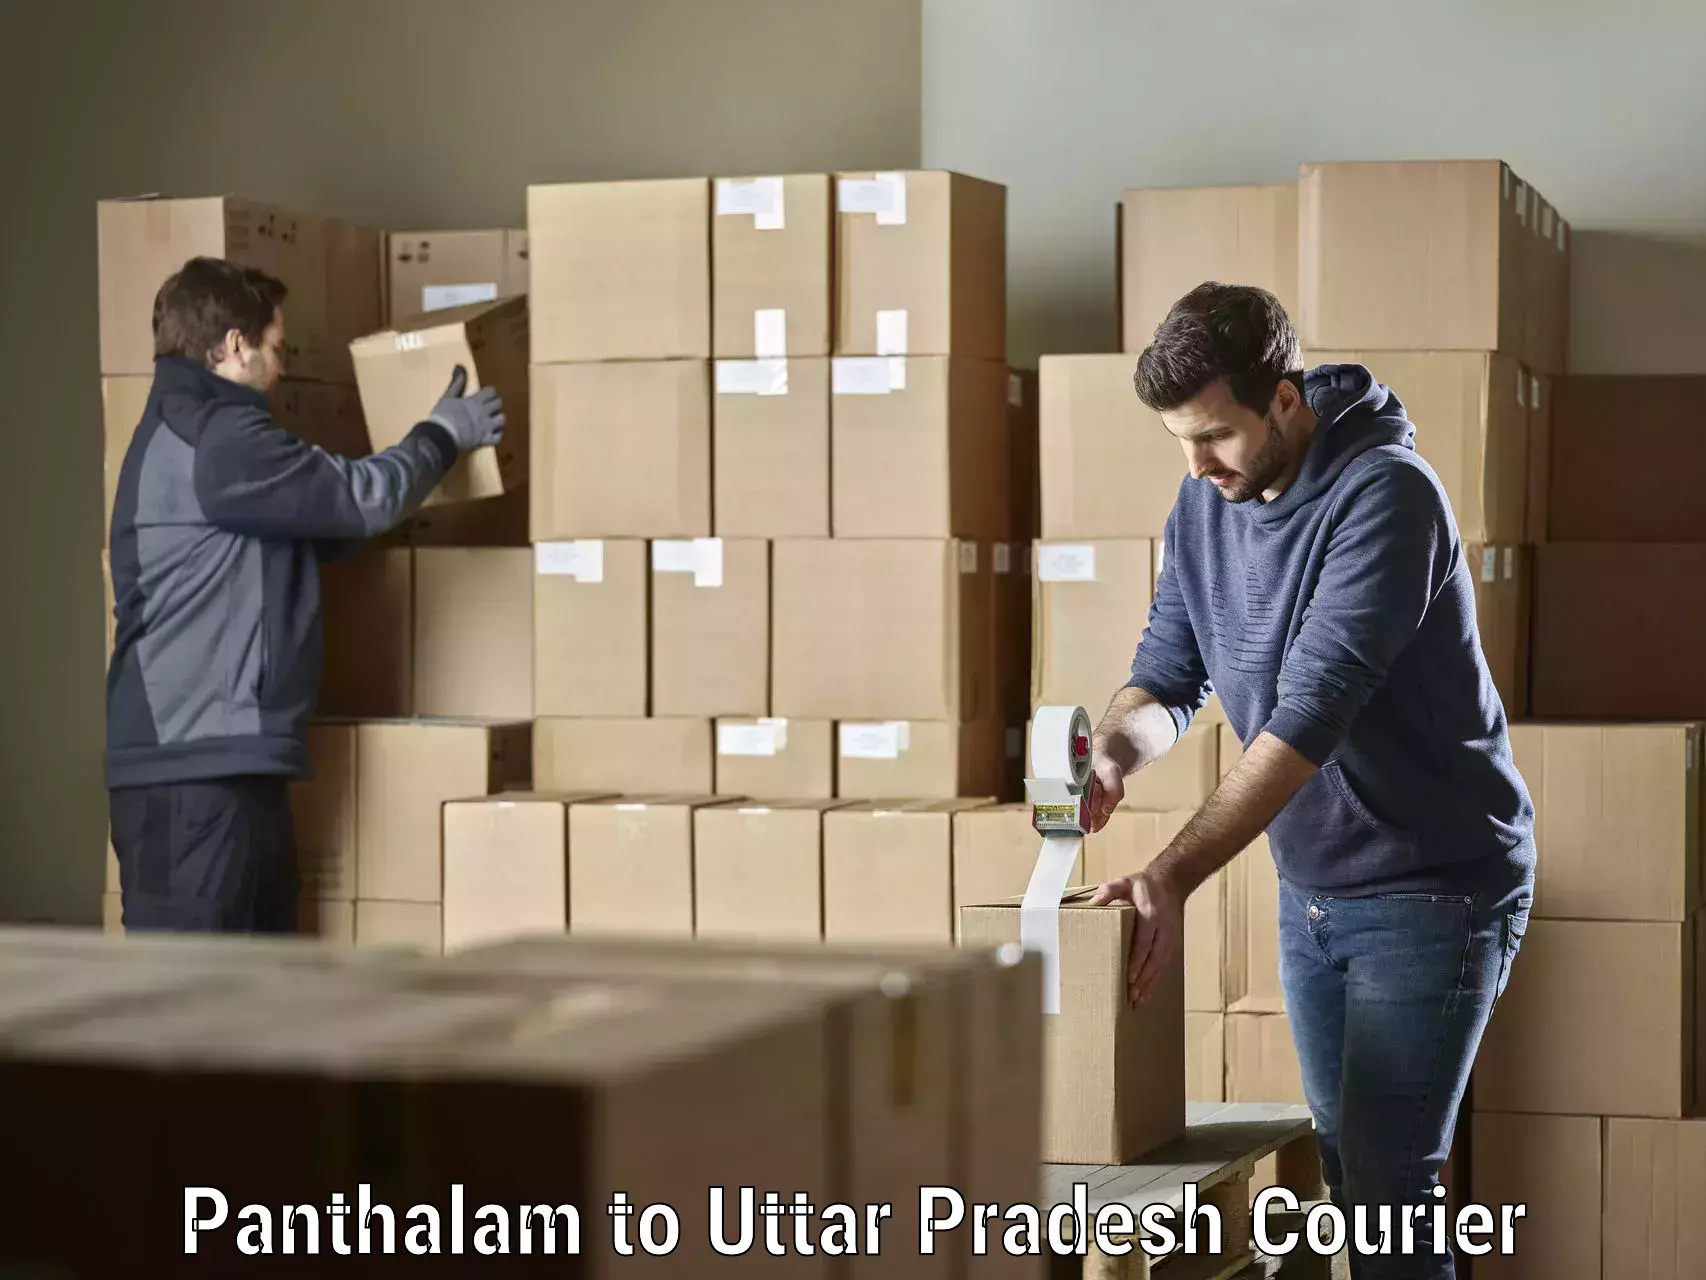 Next-generation courier services Panthalam to Konch